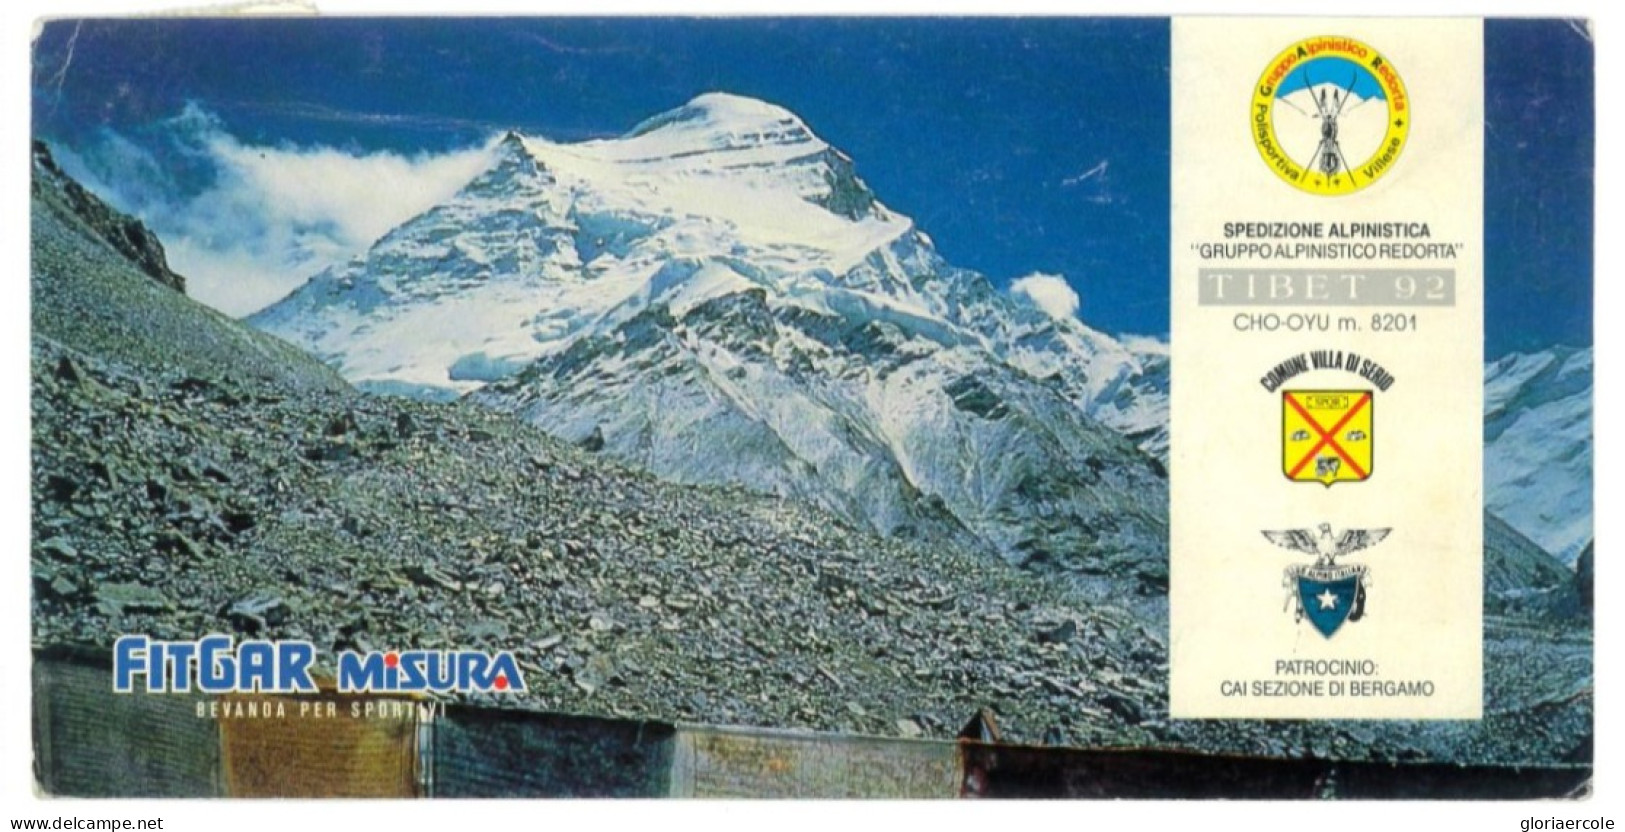 P2834 - MOUNTANEERING, ITALIAN EXPEDITION TO THE CHO-OYU TIBET 1992 SIGNED BY MOST OF THE MEMBERS. - Escalada